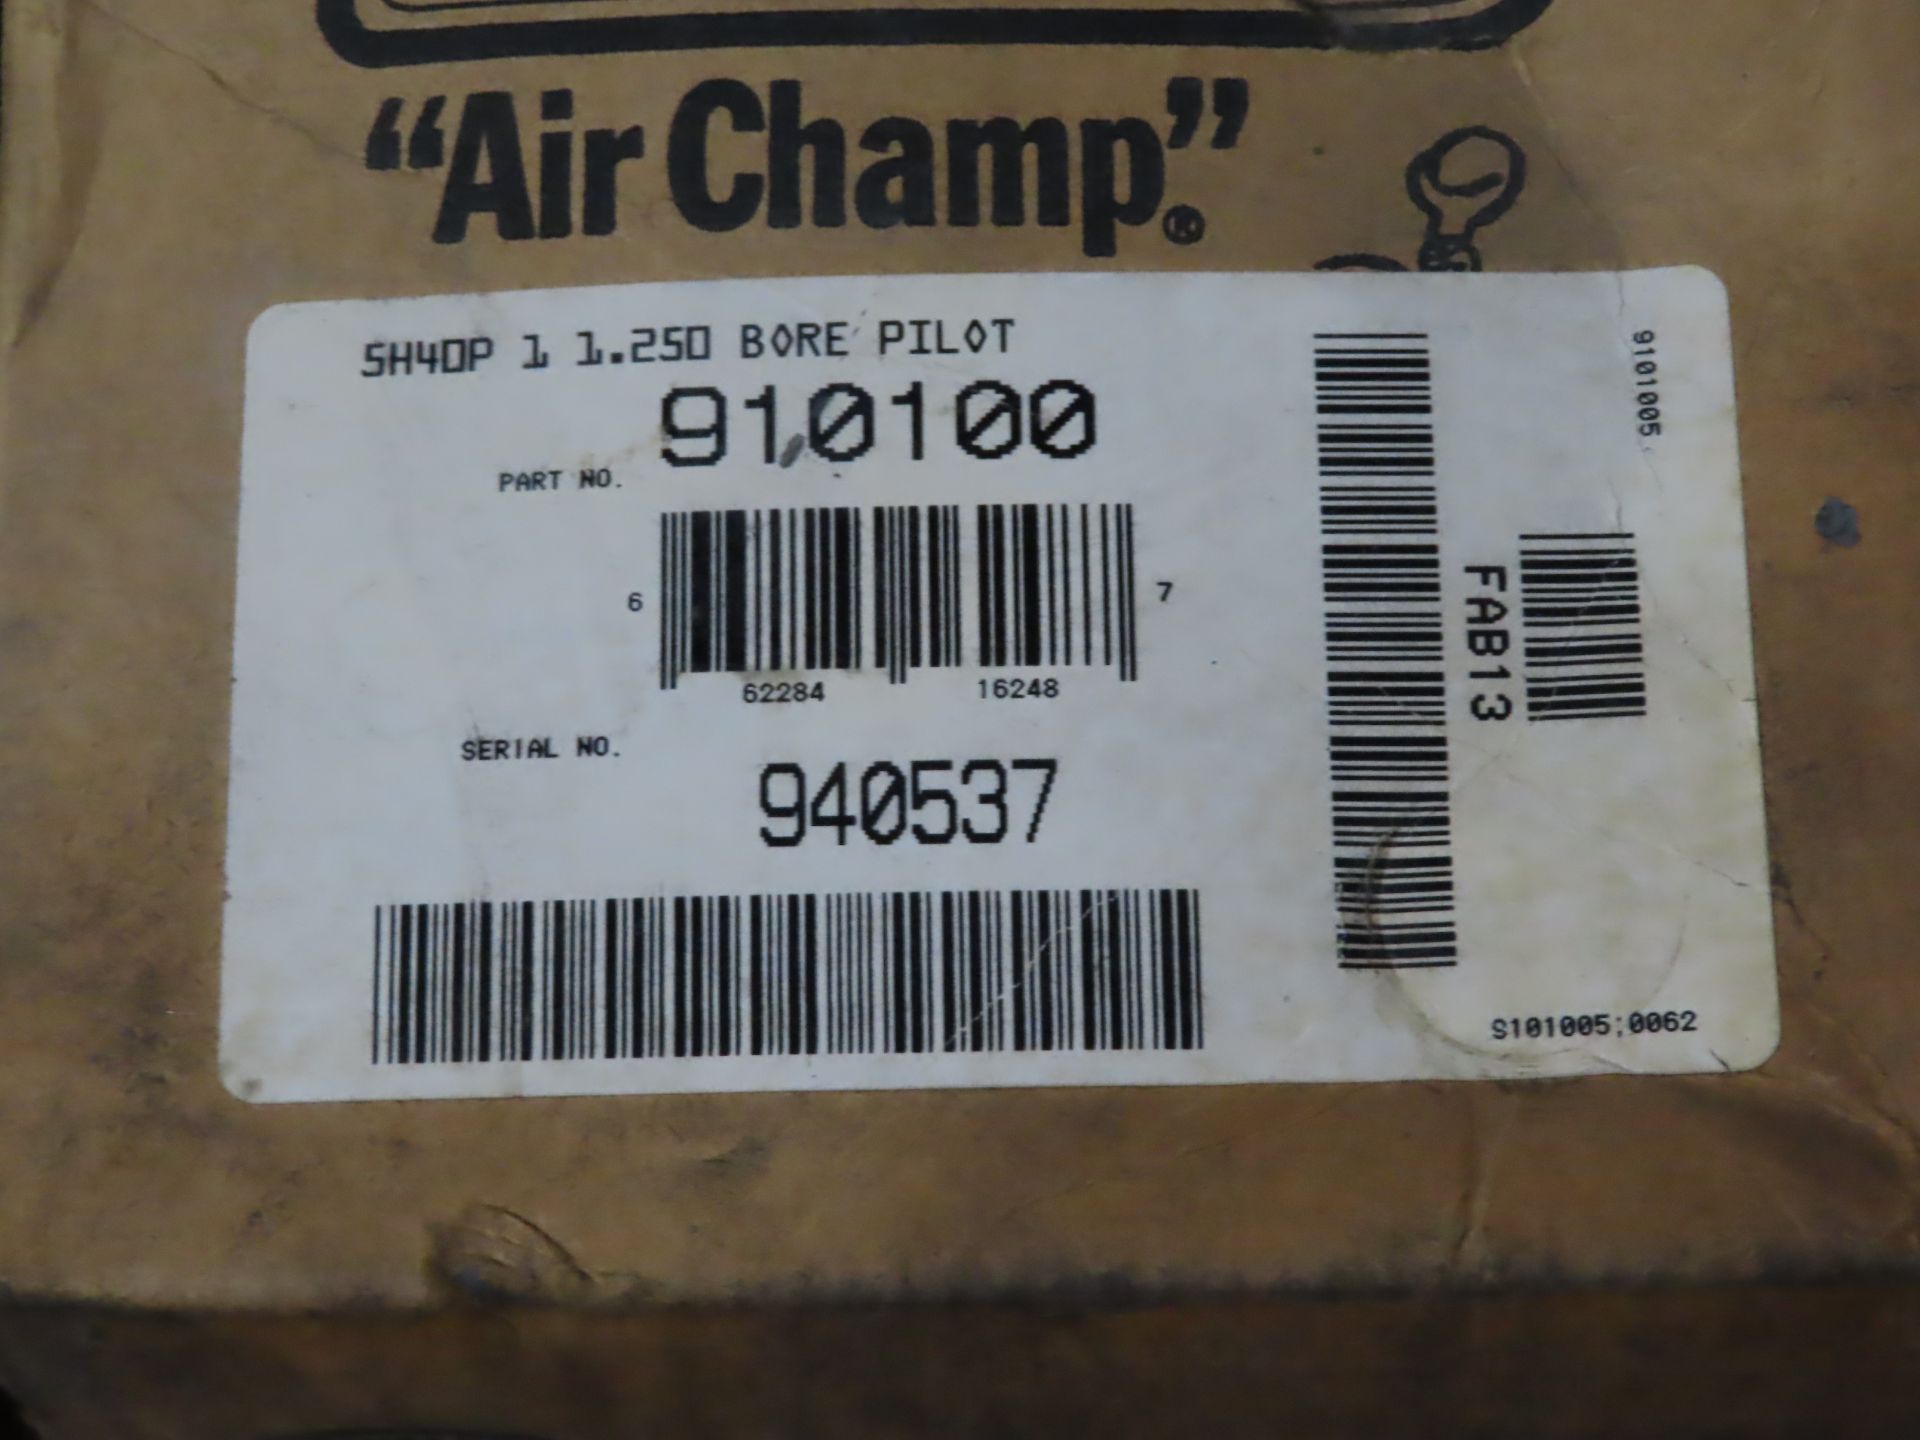 Horton Air Champ model 910100, new in box, as always with Brolyn LLC auctions, all lots can be - Image 2 of 2